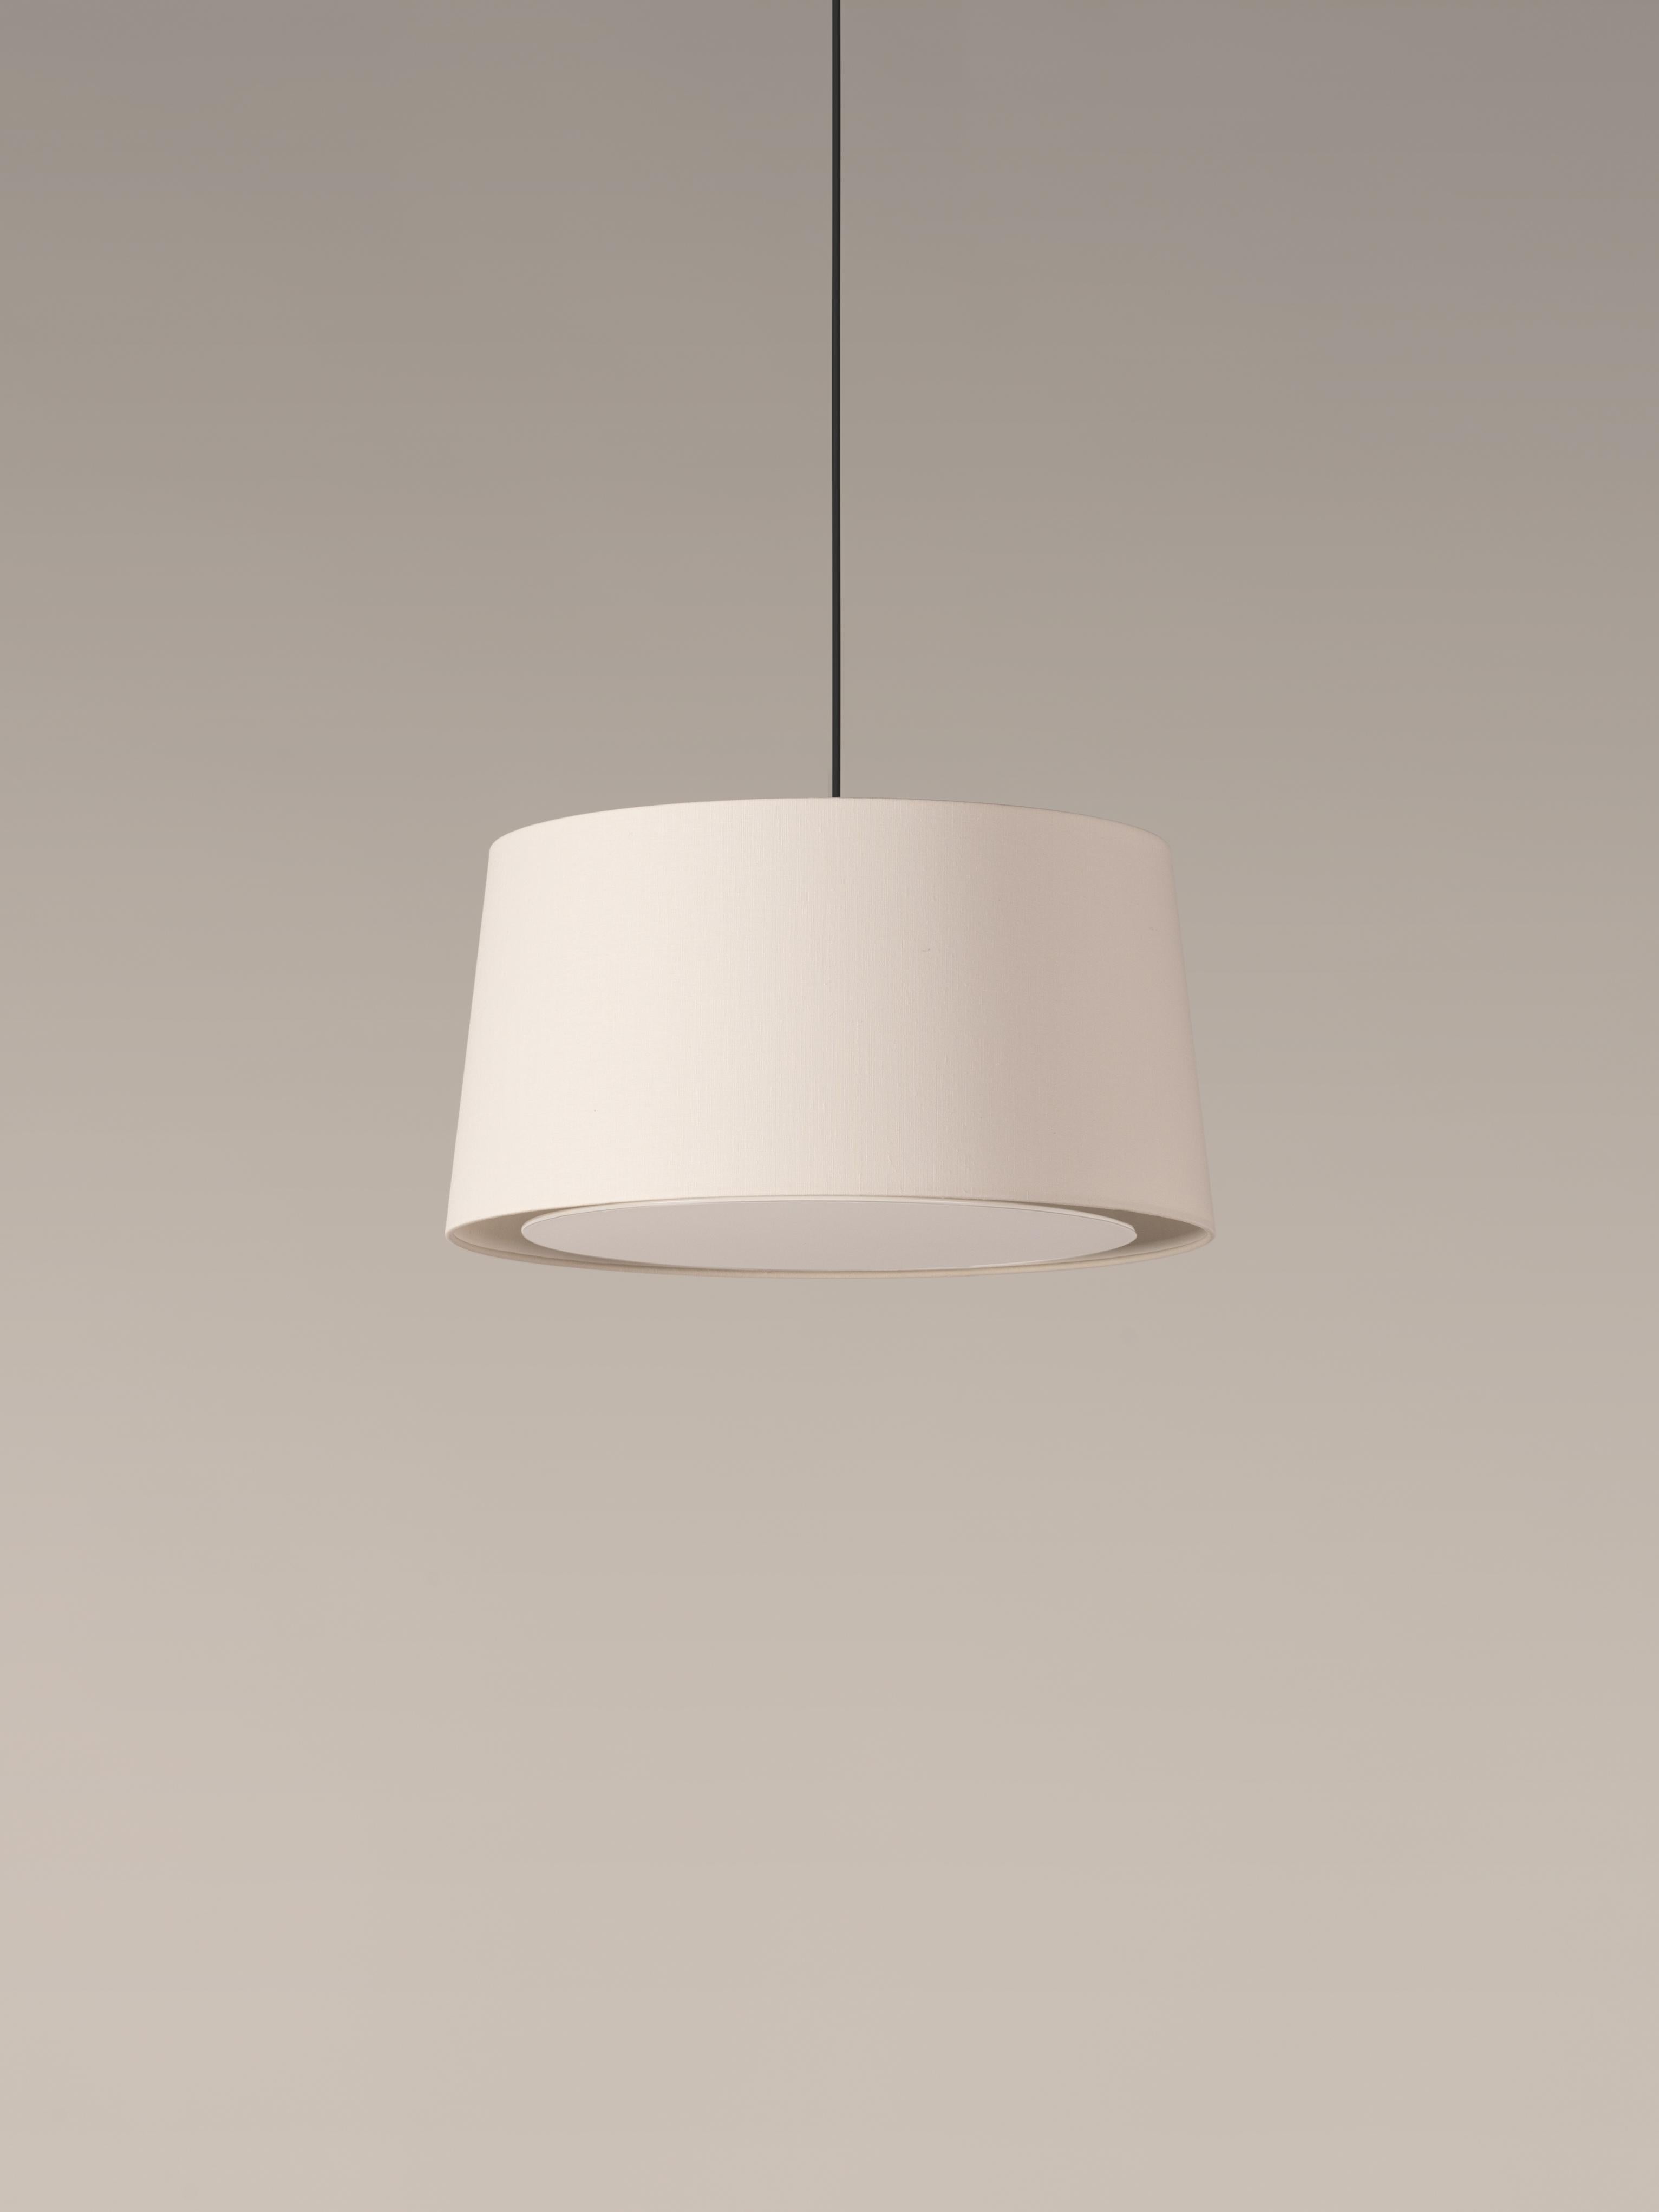 White GT6 pendant lamp by Santa & Cole
Dimensions: D 45 x H 23 cm
Materials: Metal, linen.
Available in other colors. Available in 2 lights version.

Designed for intermediate volumes and household areas, GT5 and GT6 are hanging lamps with